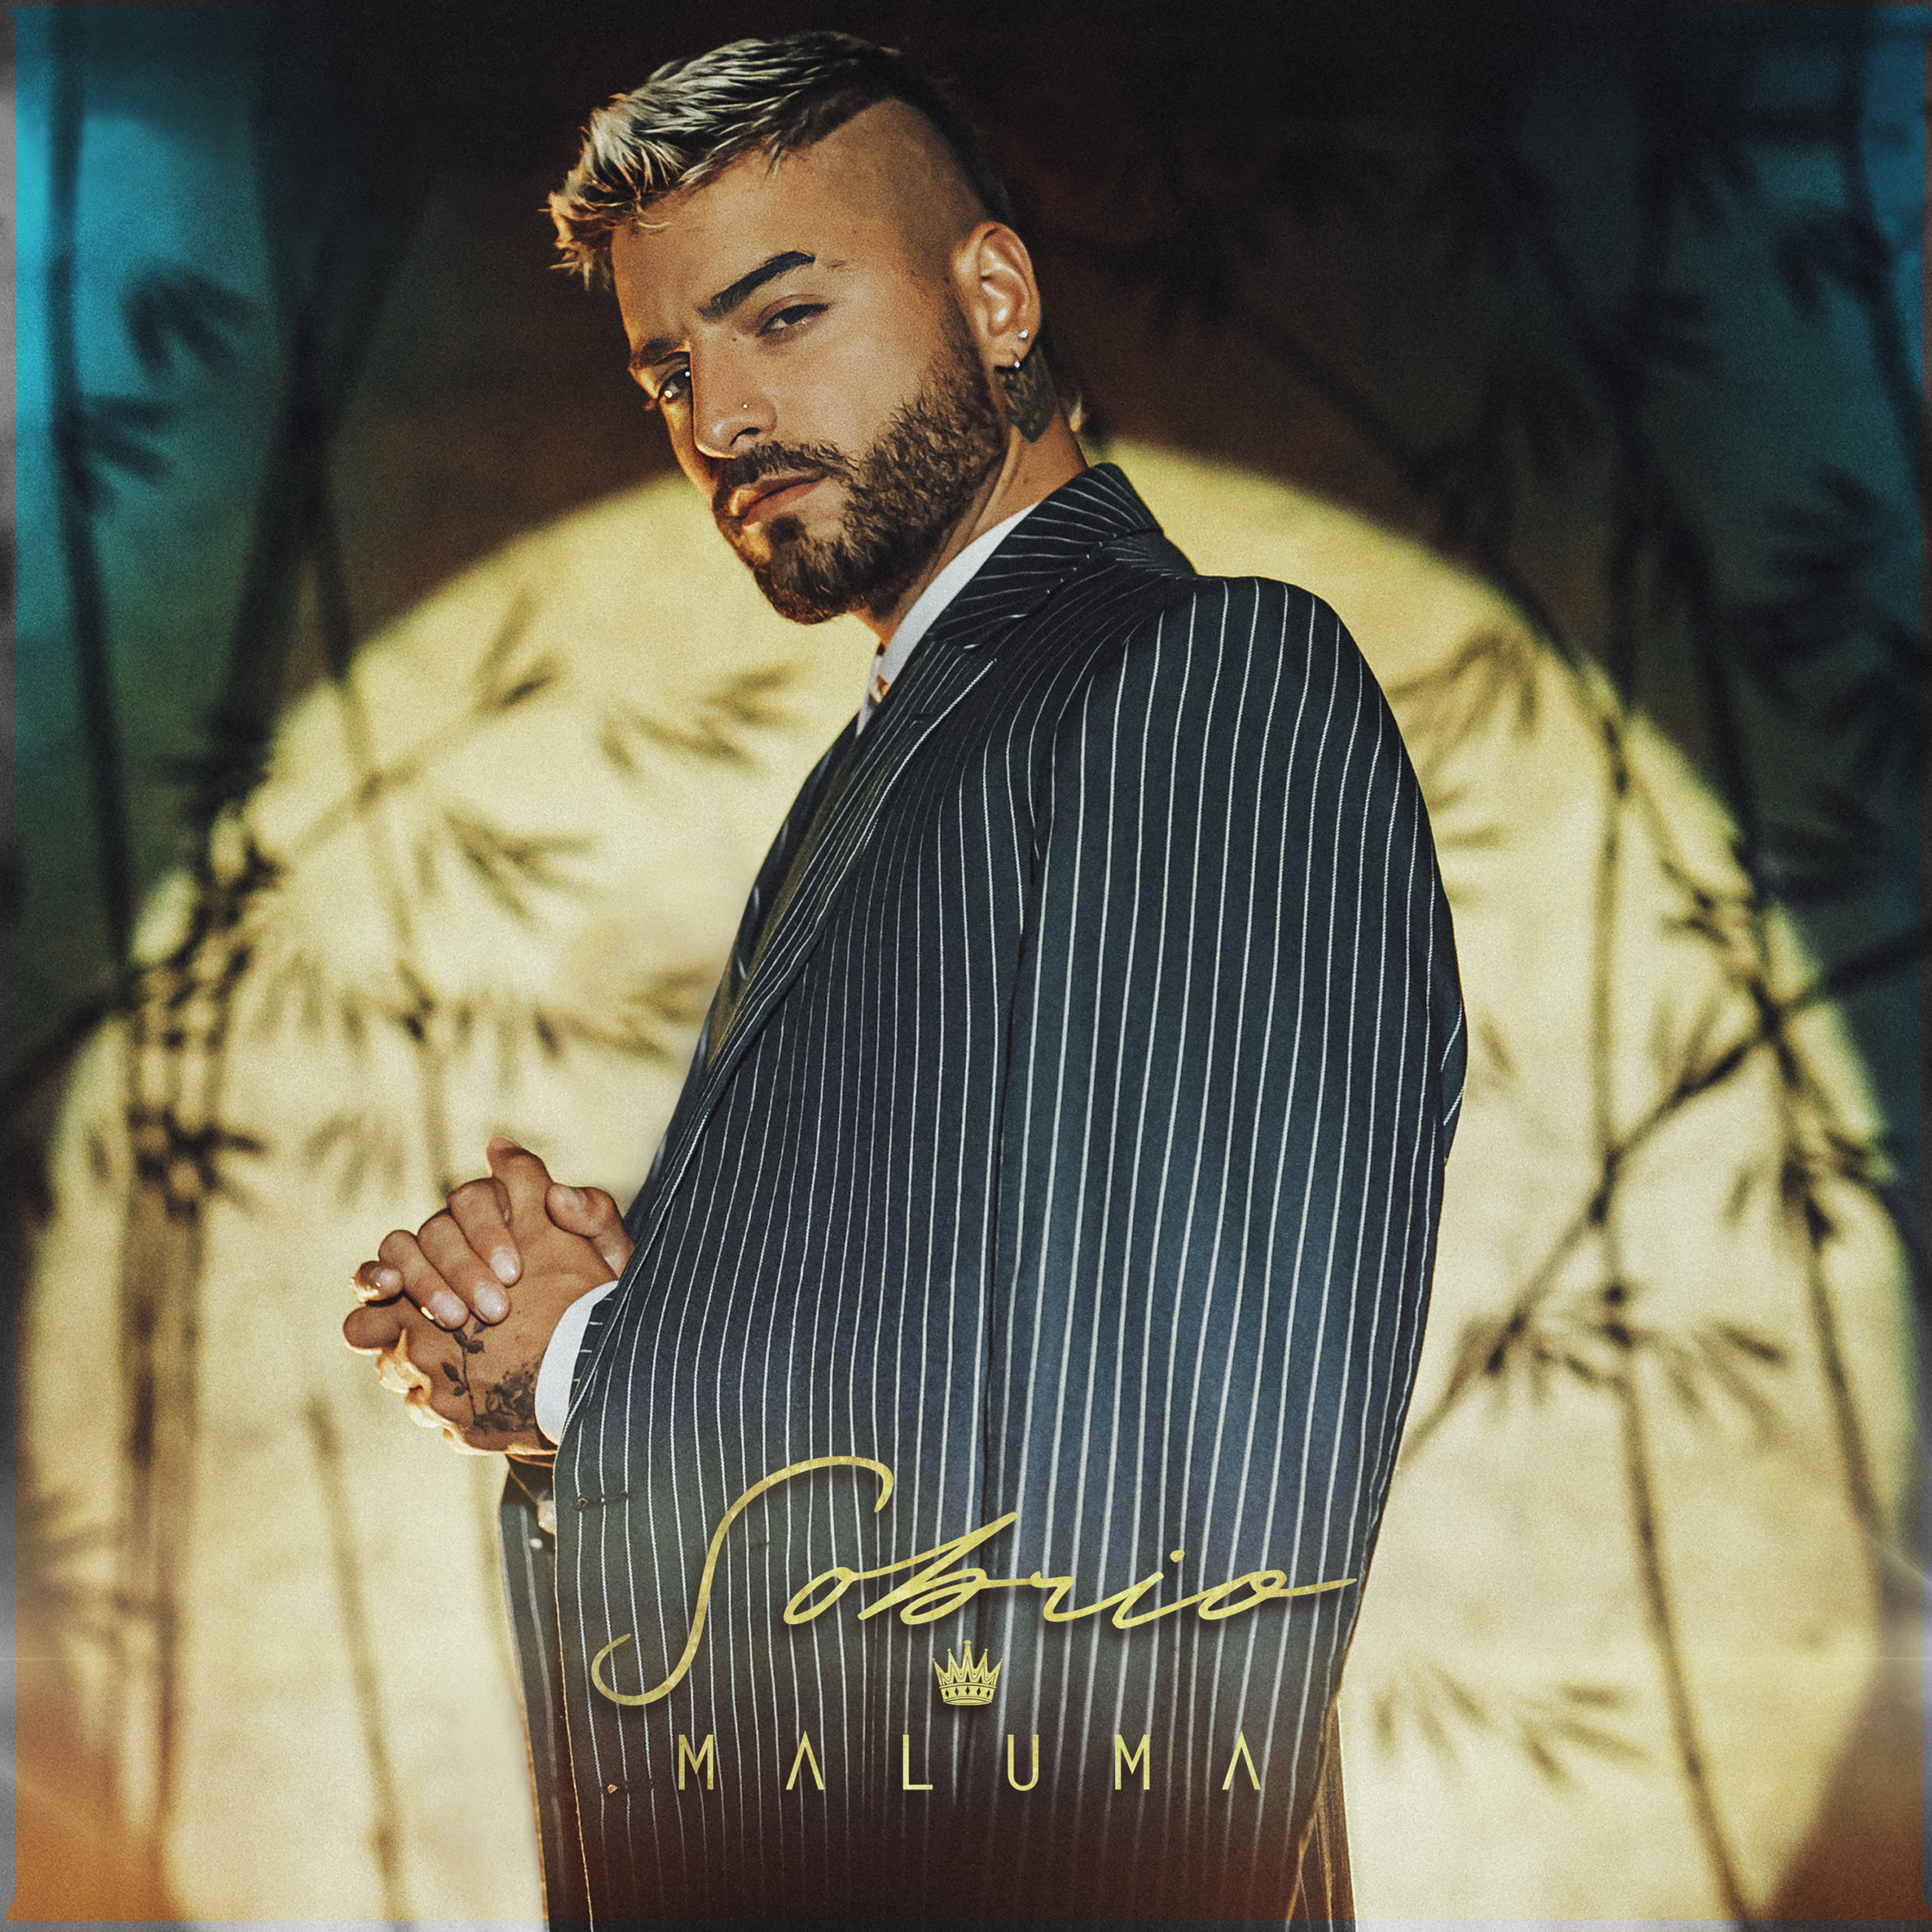 MALUMA  RELEASES NEW SINGLE AND VIDEO “SOBRIO” AVAILABLE NOW!